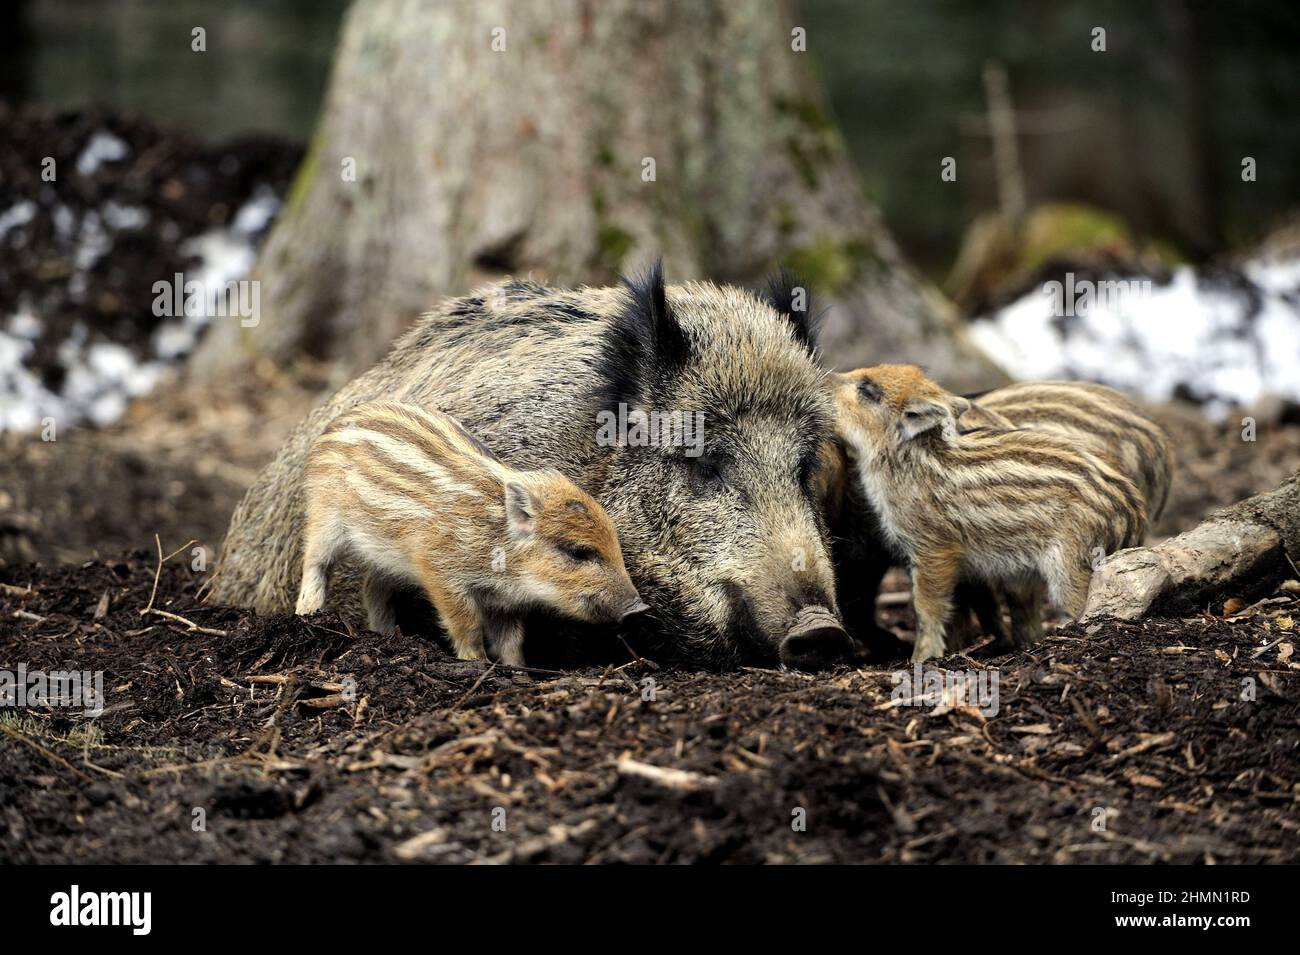 wild boar, pig, wild boar (Sus scrofa), wild sow with shoats in a forest, Germany Stock Photo